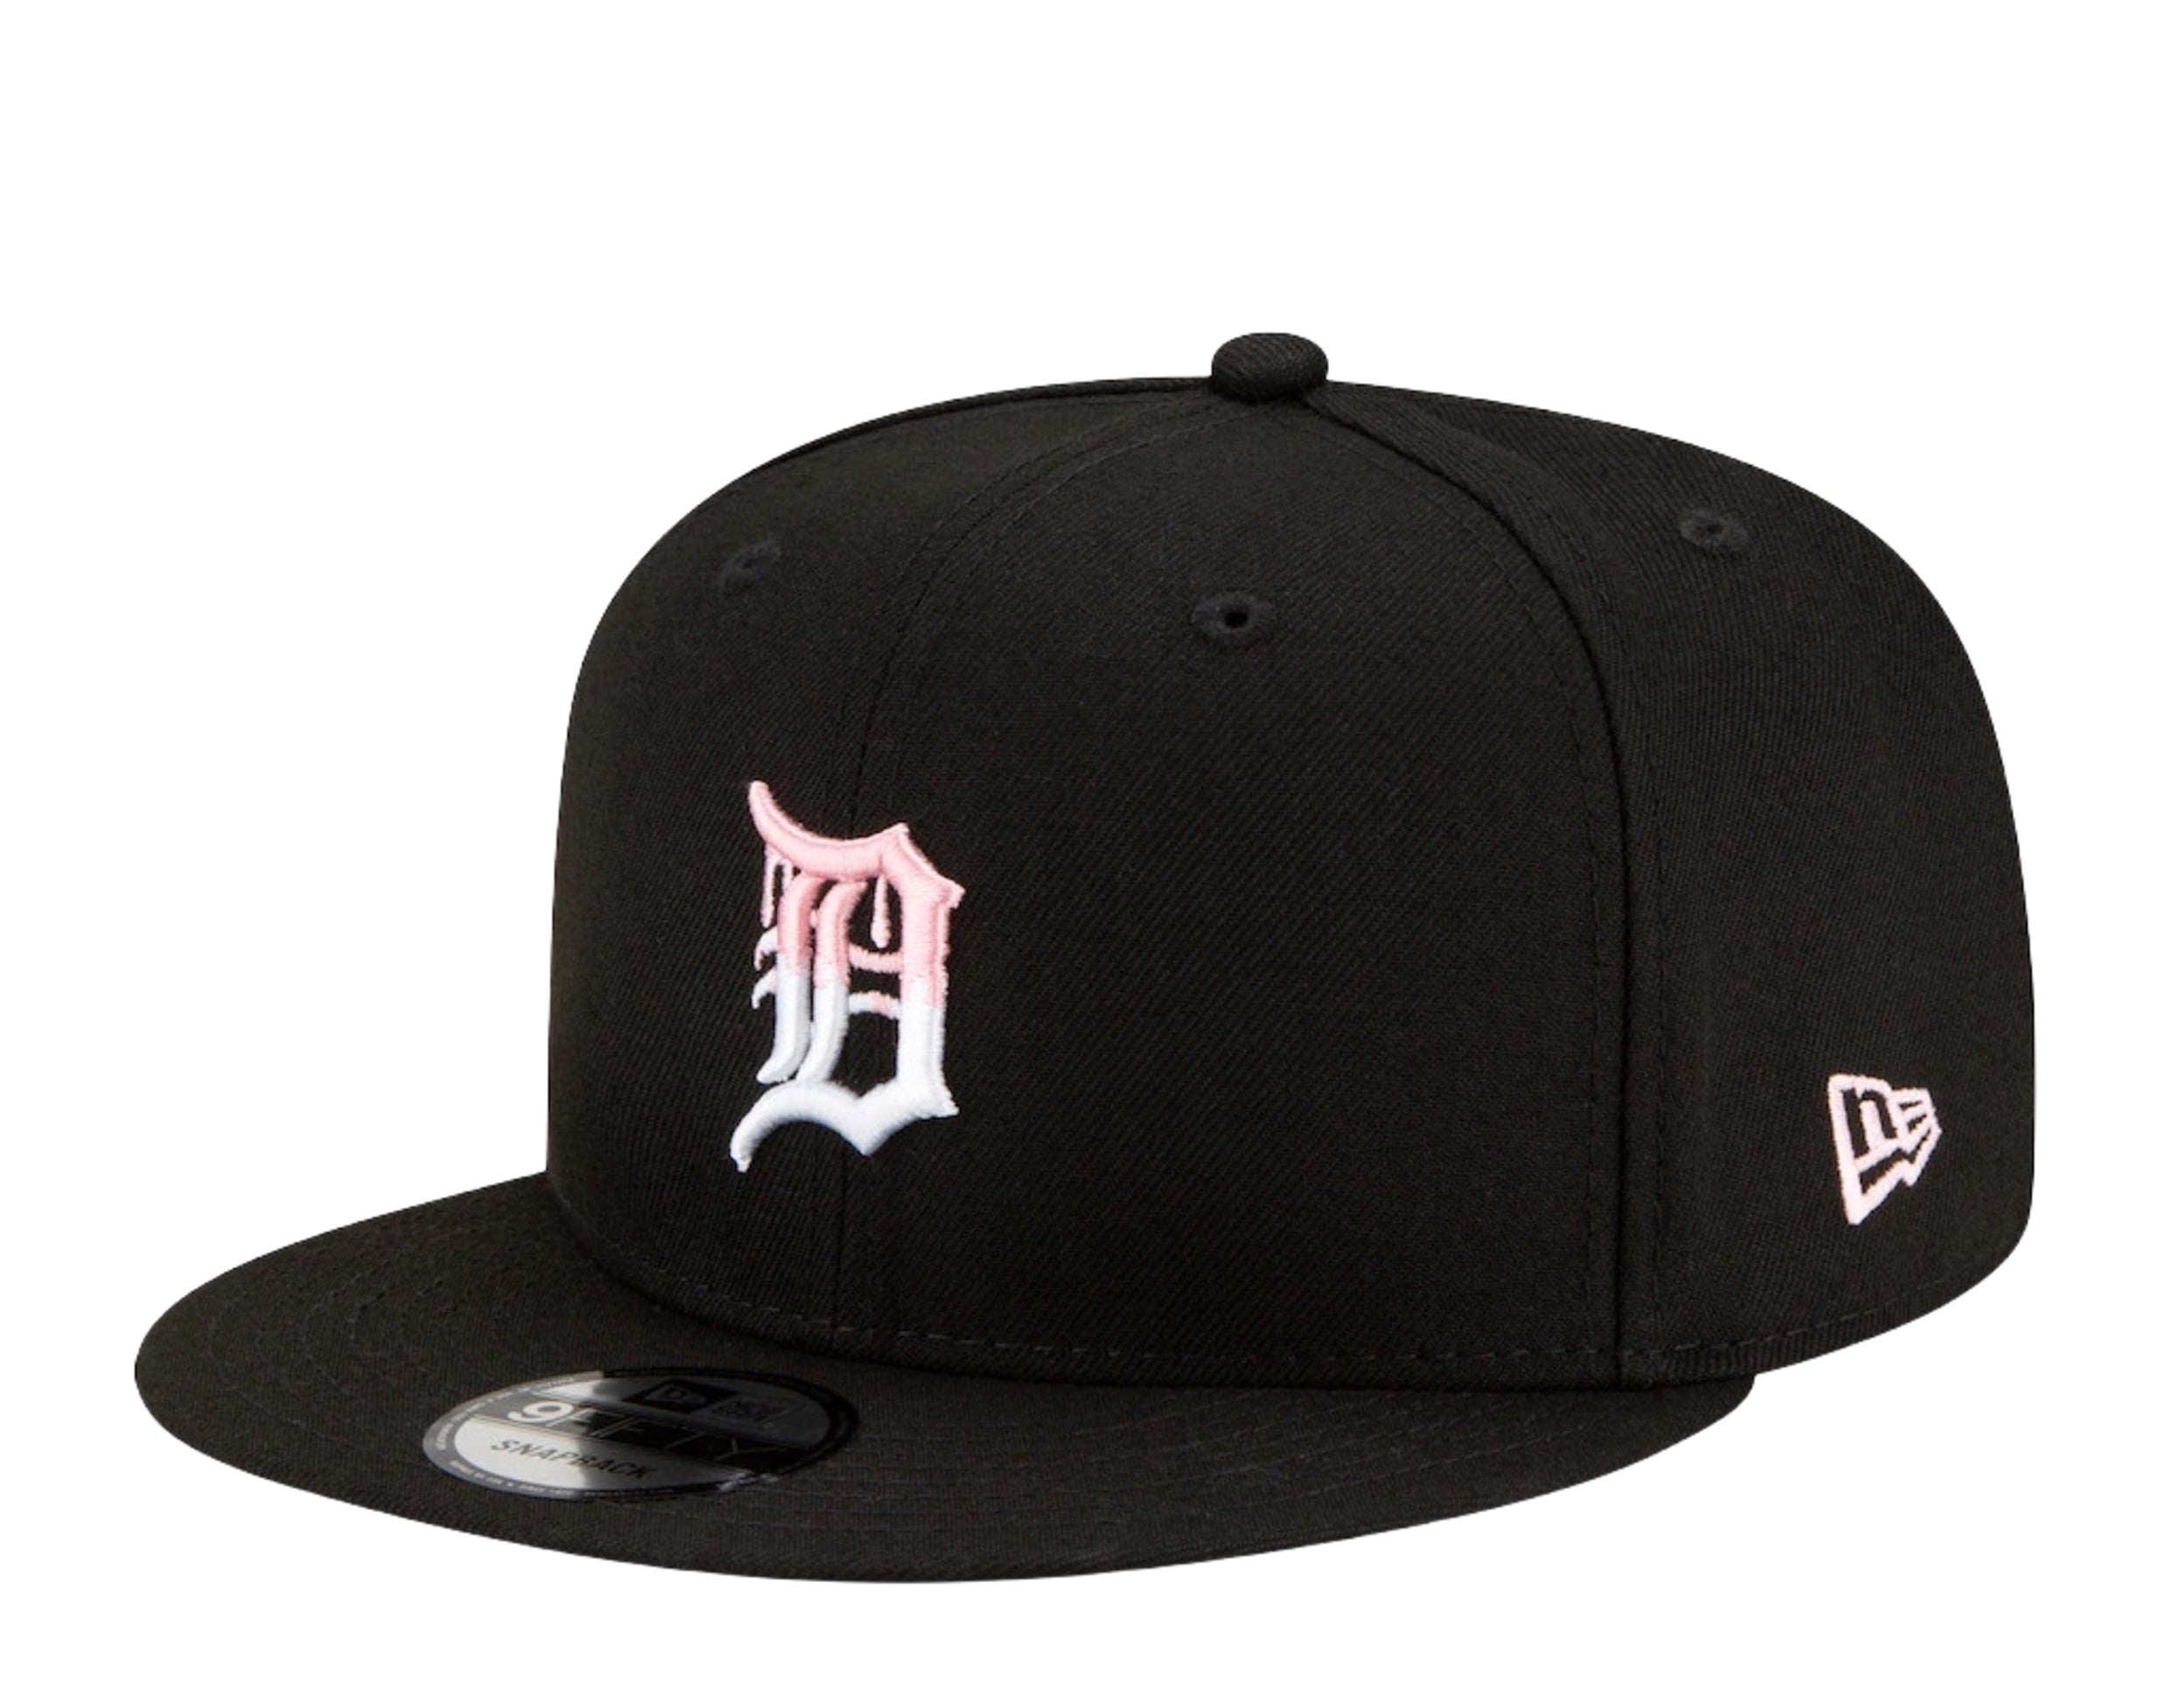 Detroit Tigers “Pinstripe” style Authentic' and - Depop